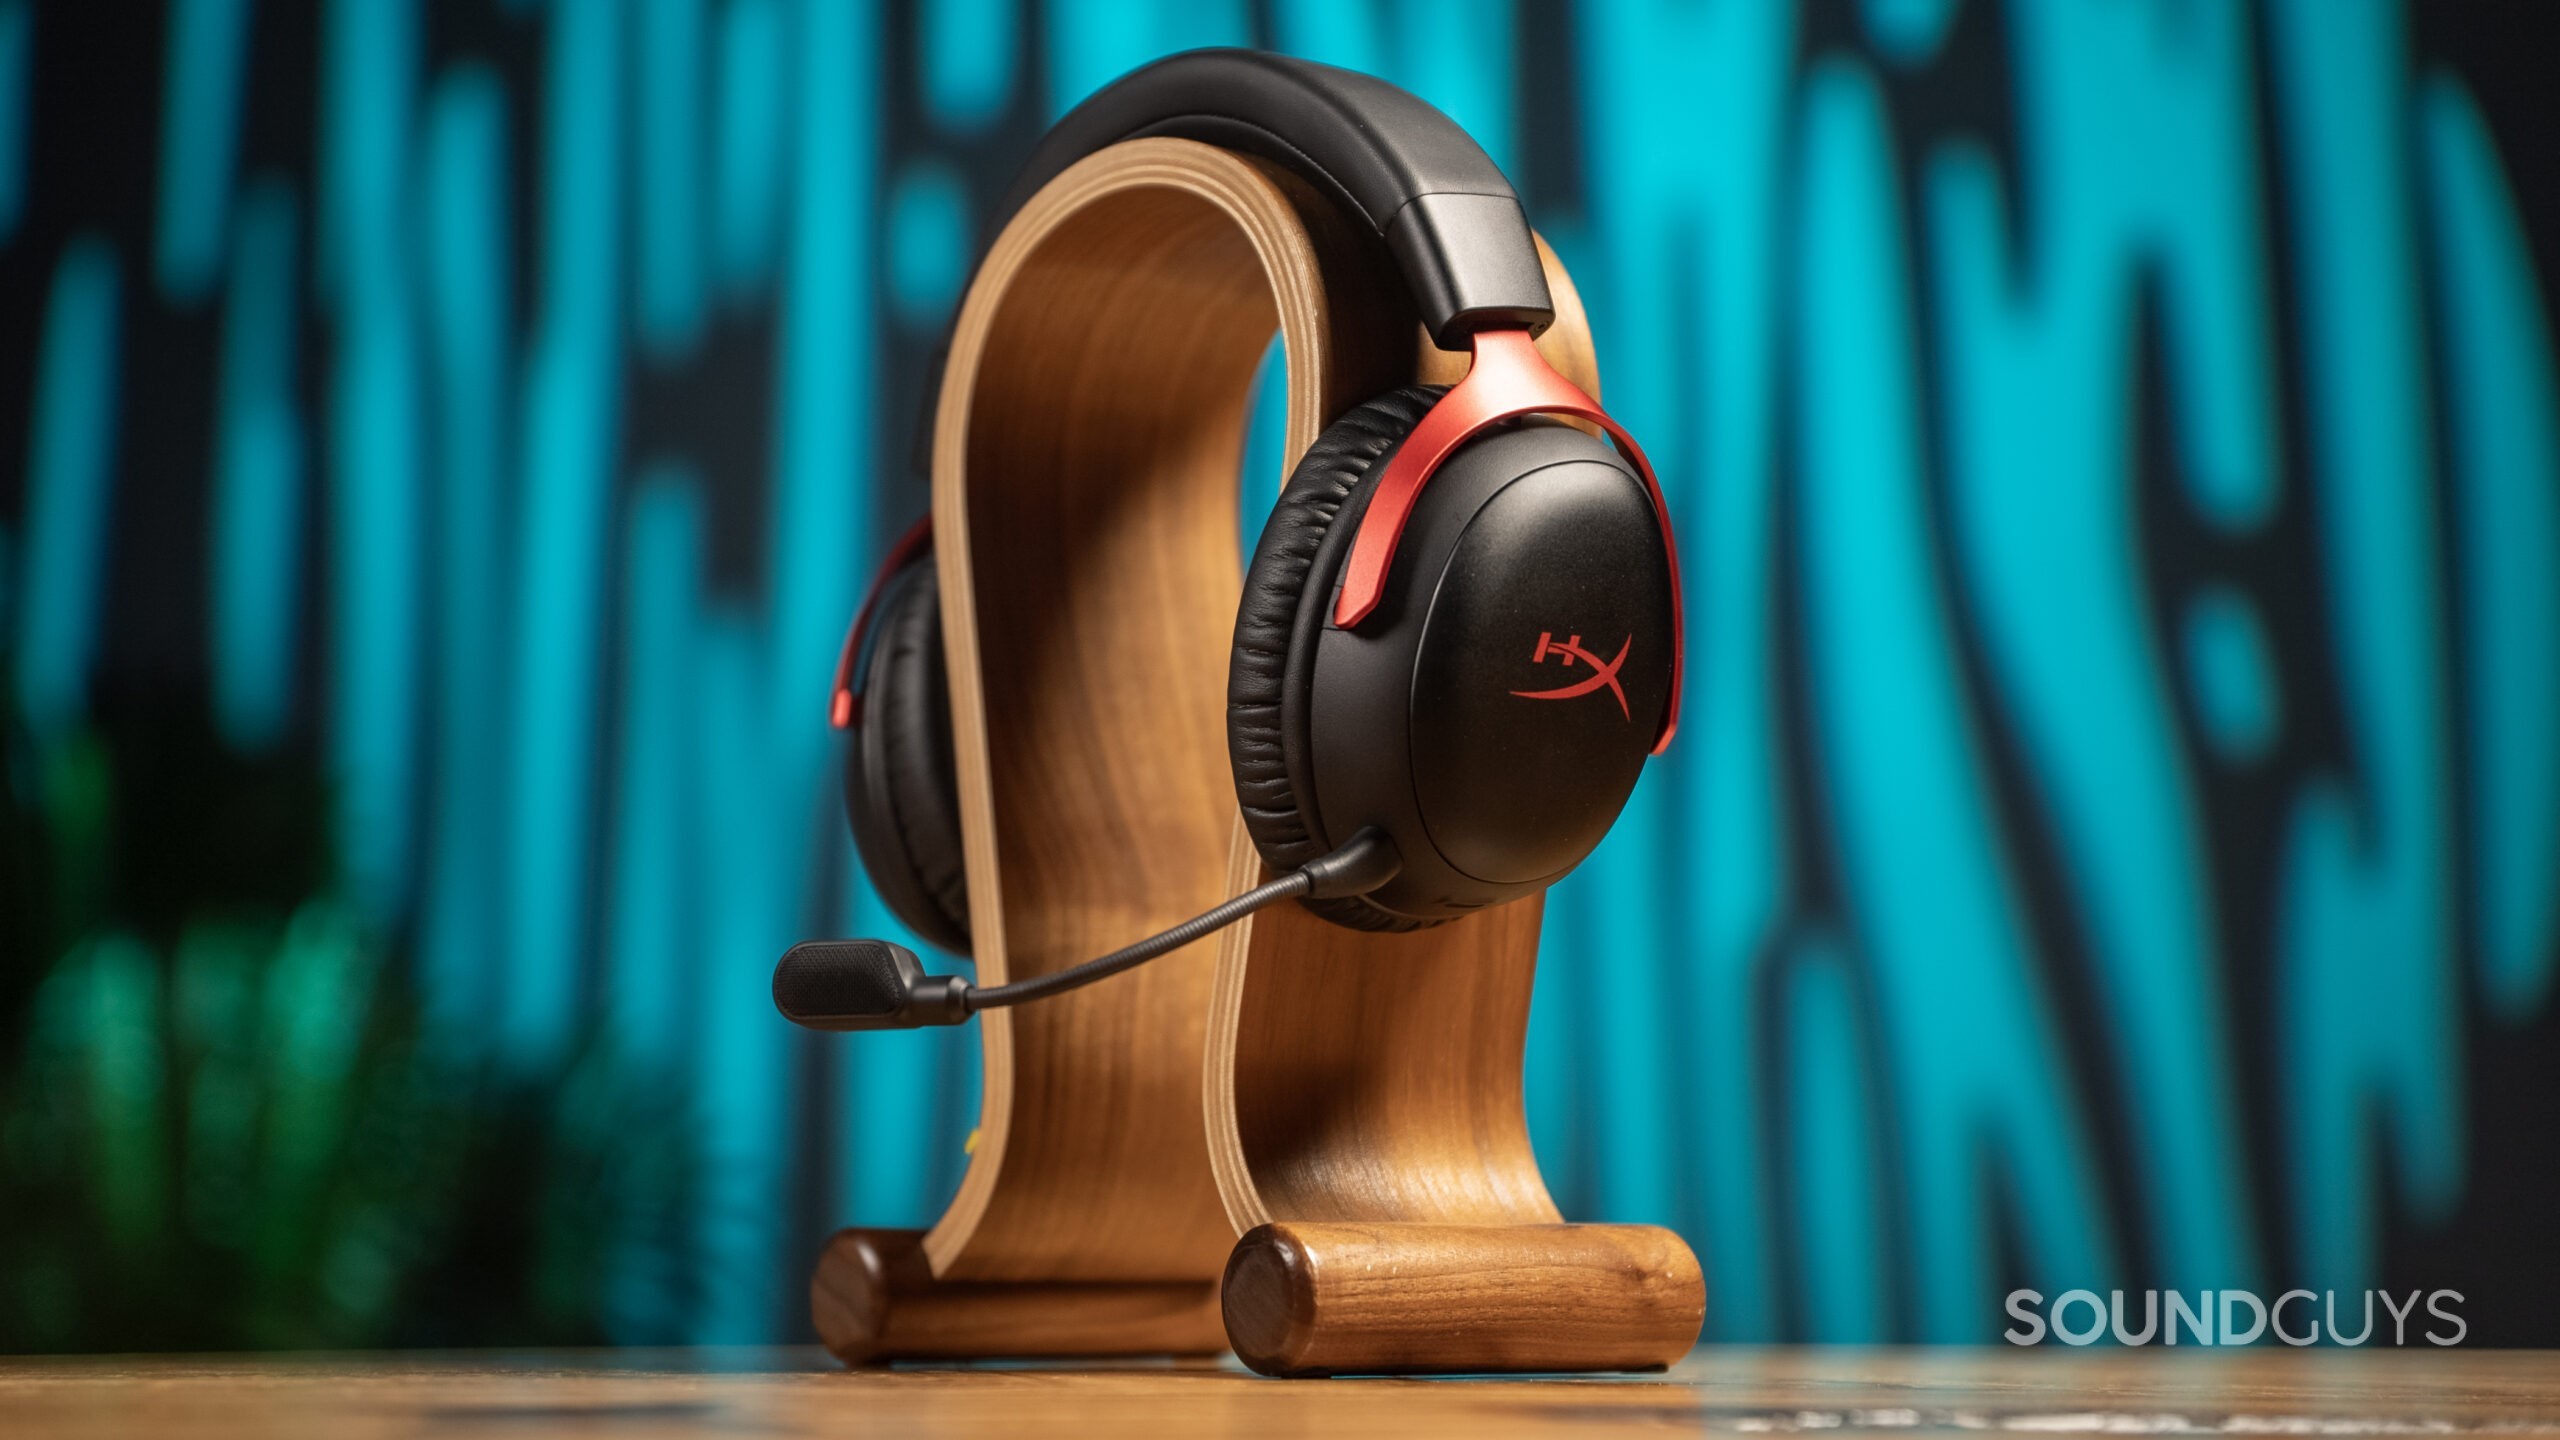 The HyperX Cloud III Wireless sits atop a wooden omega-shaped headphone stand.